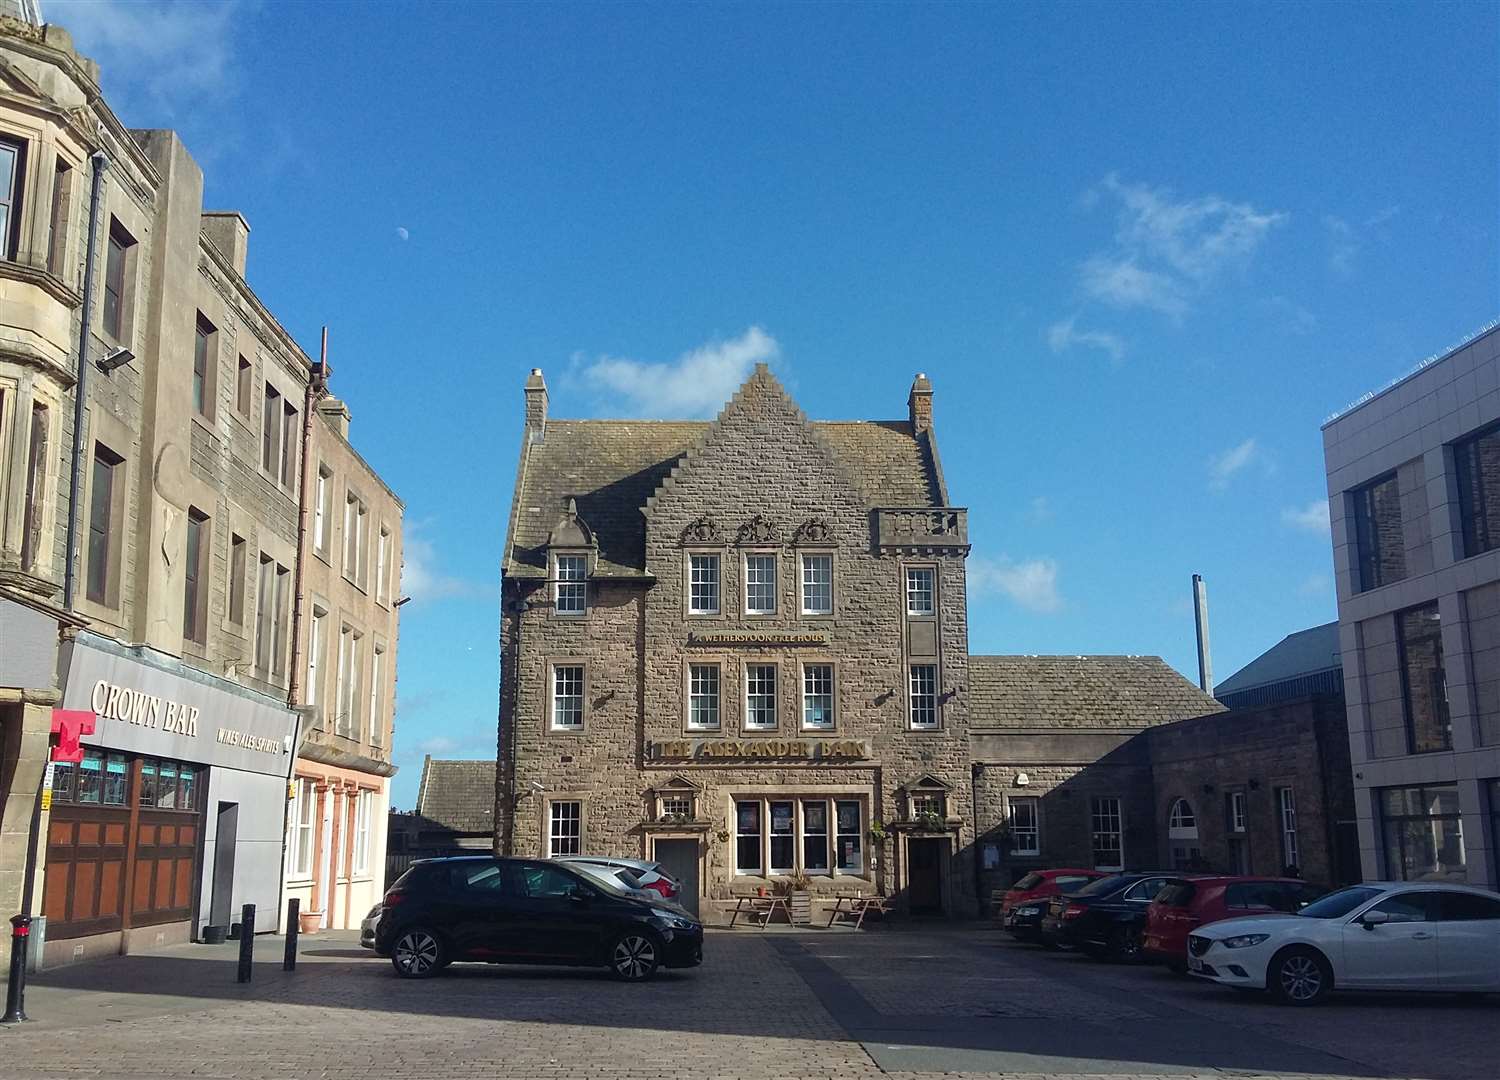 The JD Wetherspoon pub in Wick.